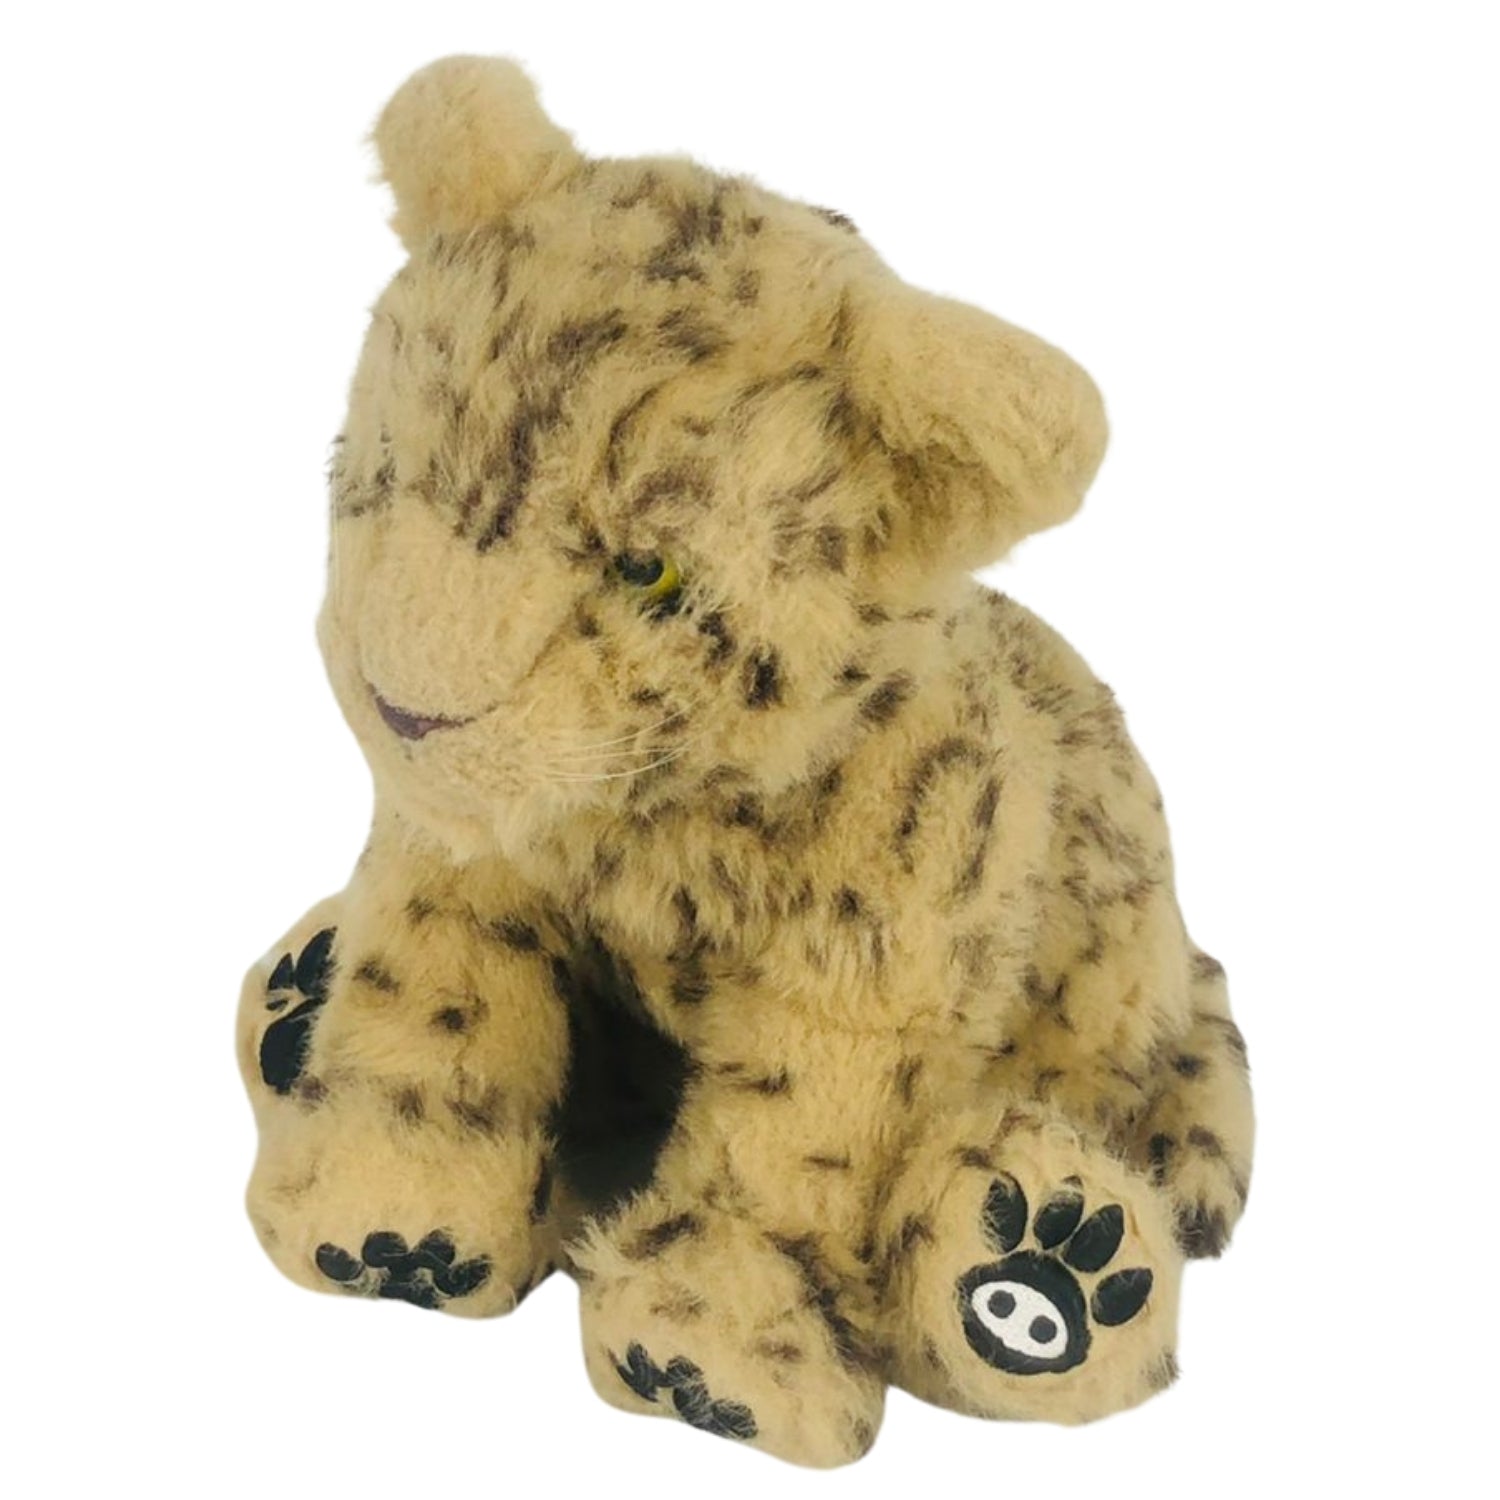 Stuffed Tiger Soft Plush Toy For Kids